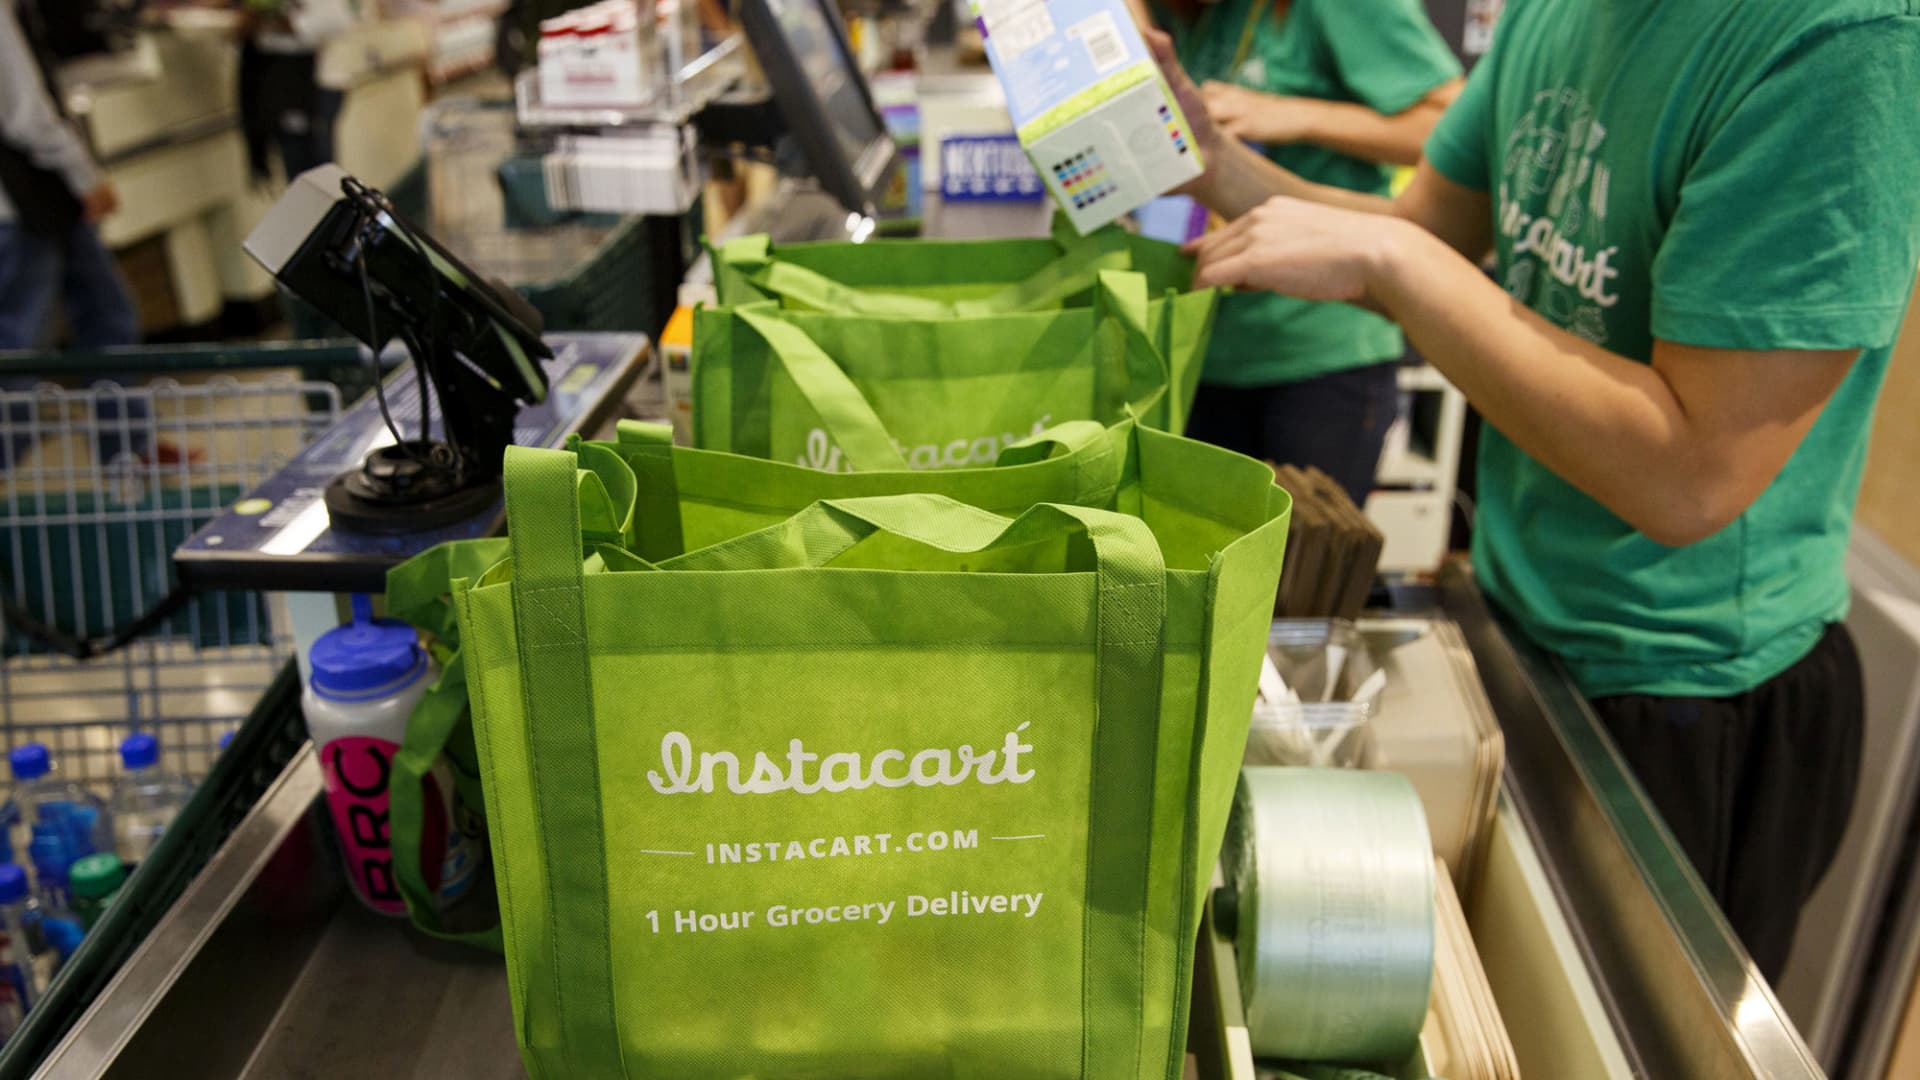 Instacart aiming for valuation of $8.6 billion to $9.3 billion in IPO, experiences disclose